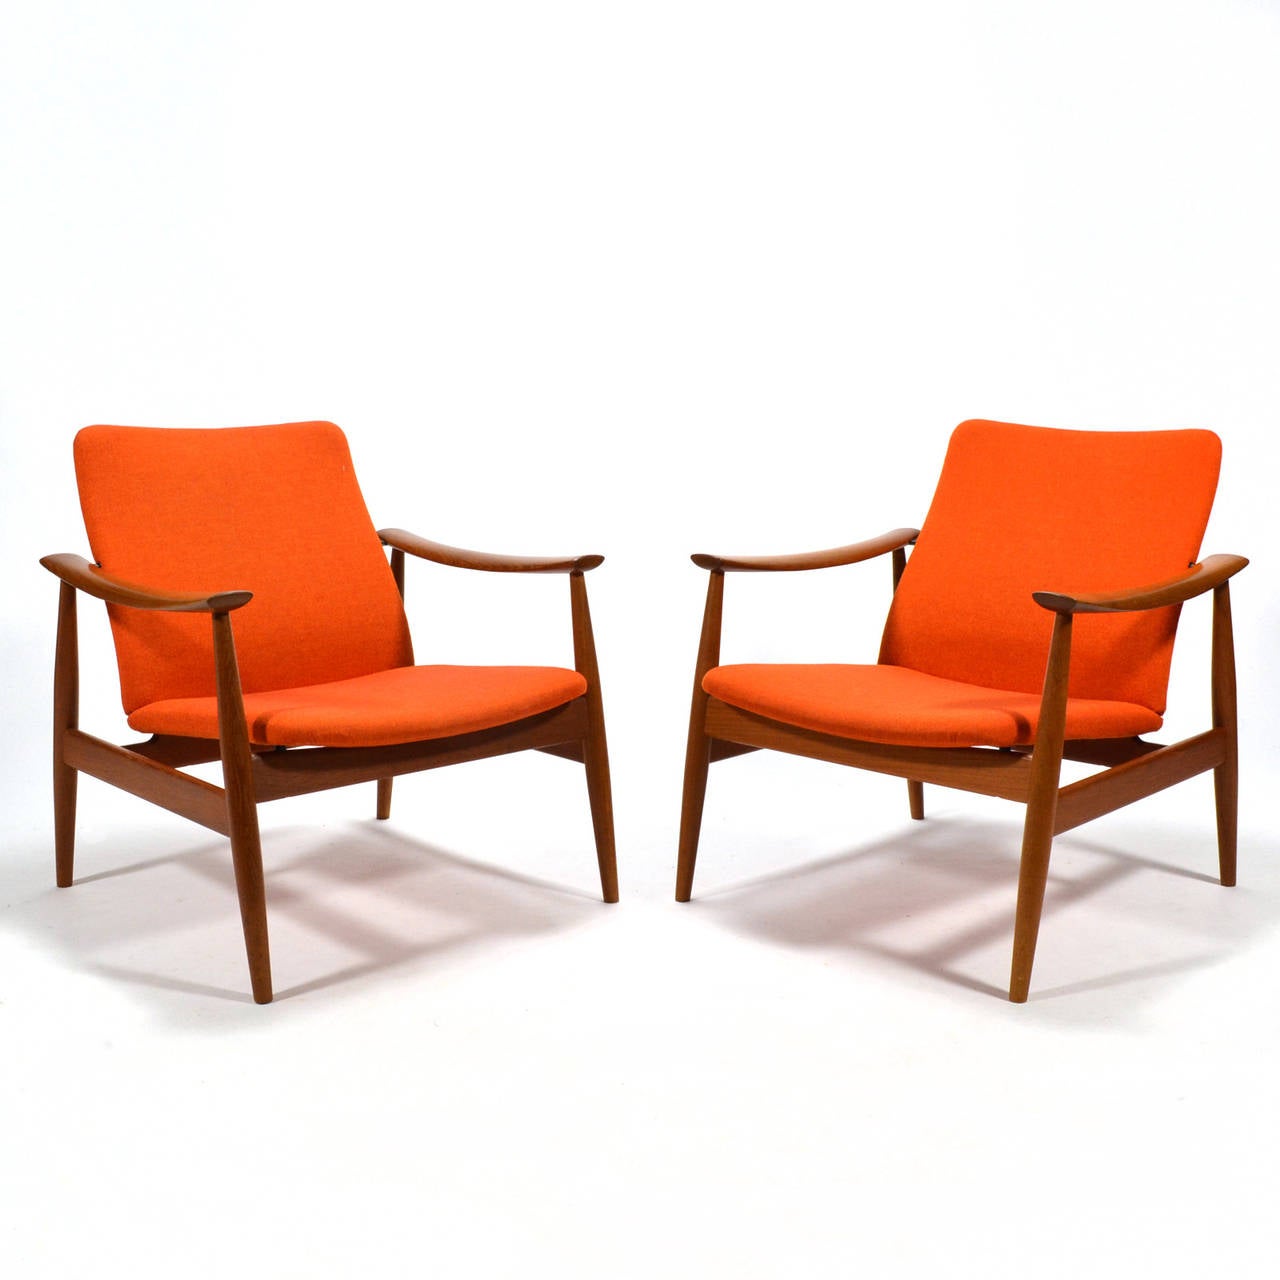 Designed in 1961 for France & Søn, this exquisite pair of model 138 lounge chairs by Danish master Finn Juhl have sculpted frames of teak supporting a 